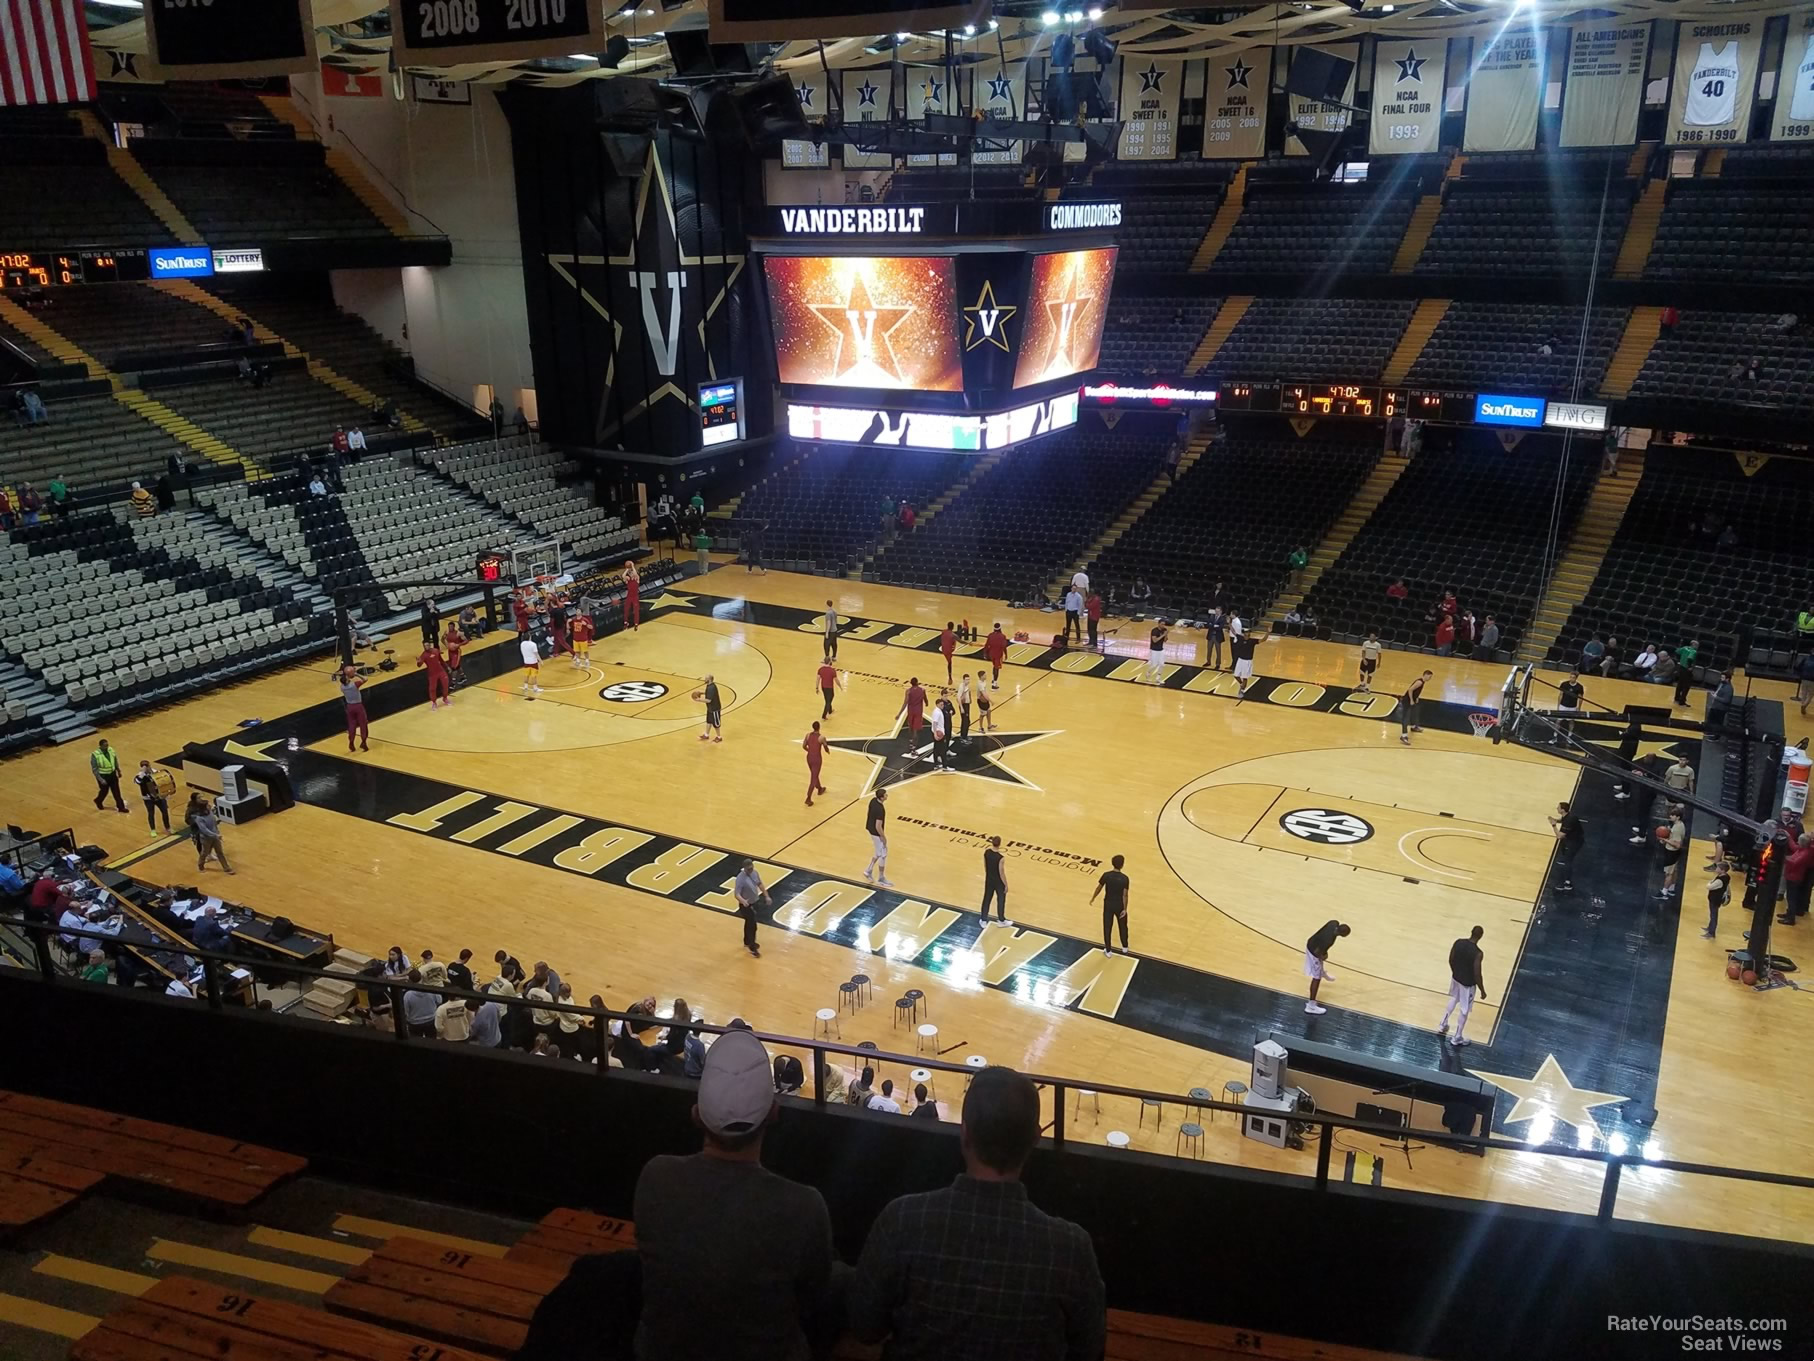 section 3g, row 7 seat view  - memorial gymnasium